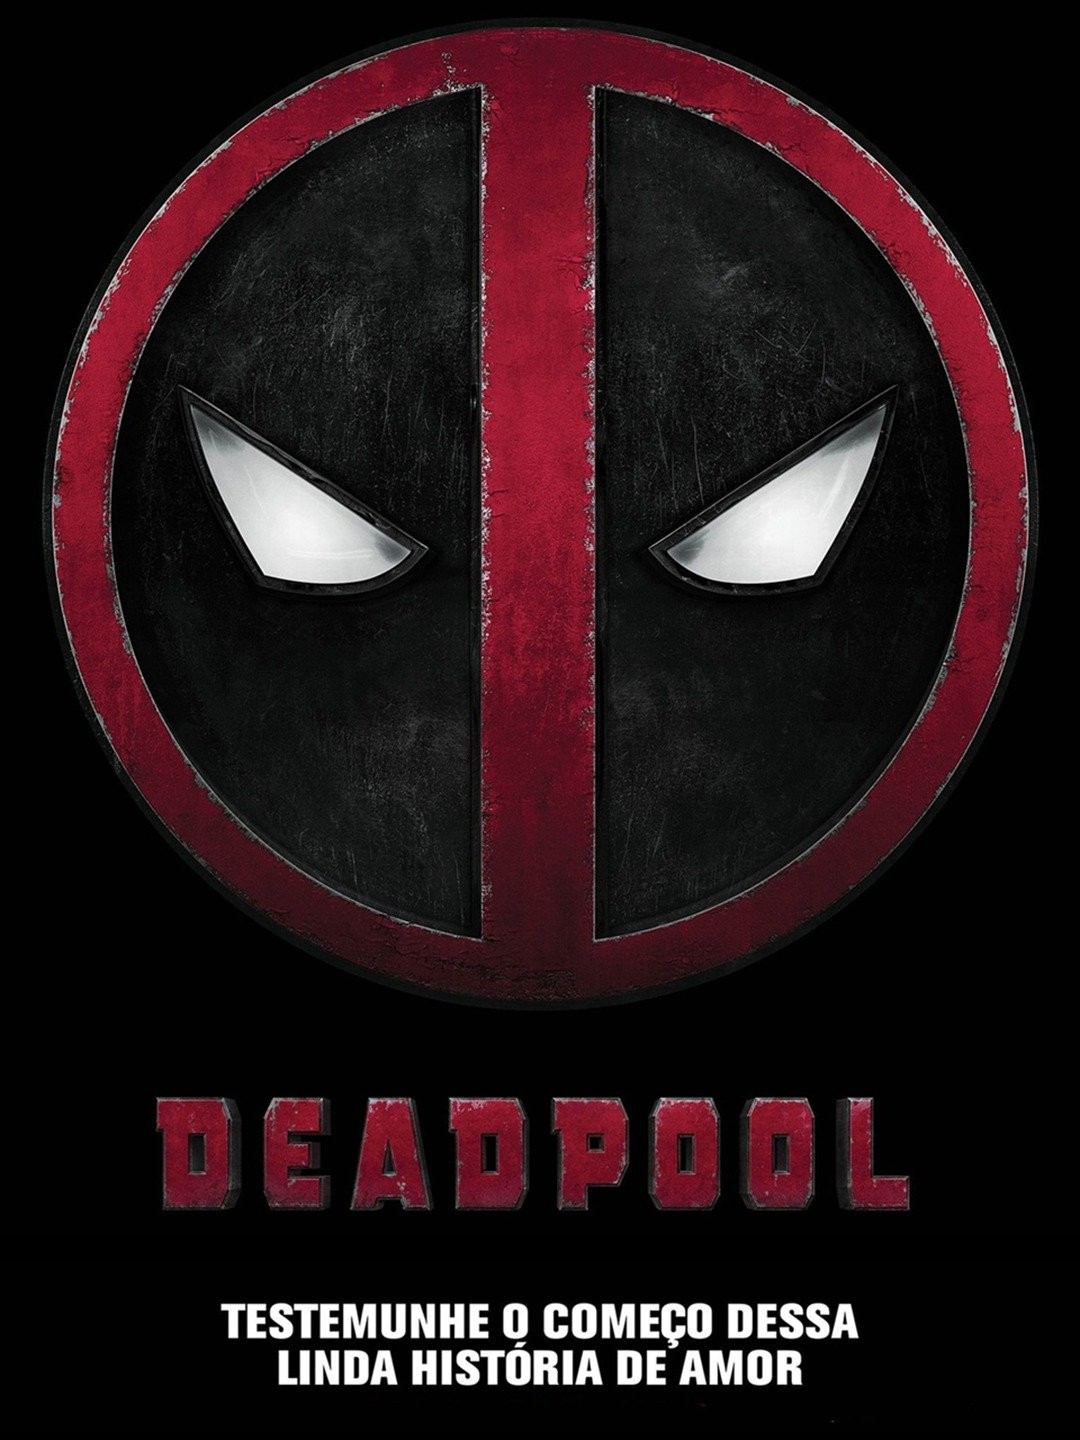 angeline yew recommends Deadpool Movie Free Download